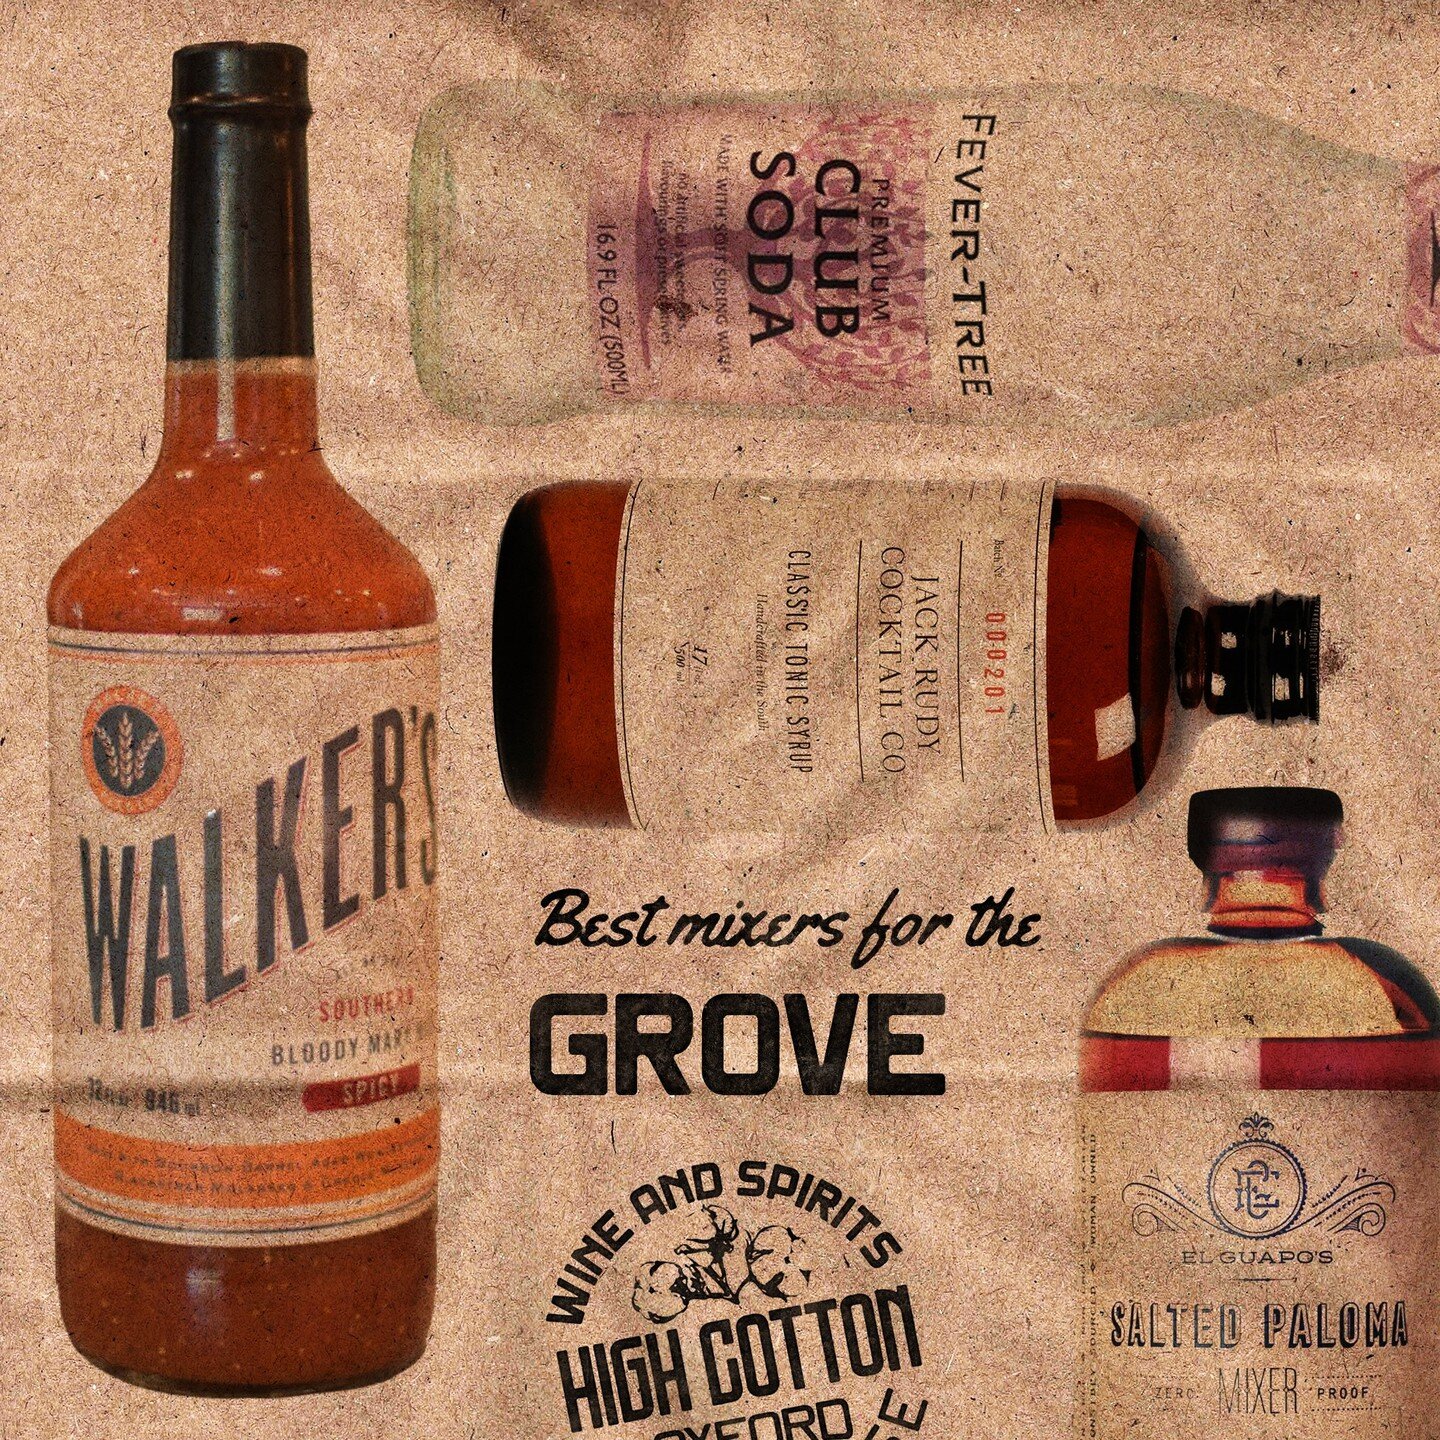 Every Grove tent should be stocked with quality mixers. Here's some of our favorites for game day:

El Guapo's Salted Paloma Mix
Walker's Bloody Mary Mix
Fever-Tree Club Soda
Jack Rudy Classic Tonic Syrup

Want more great drink recommendations for yo